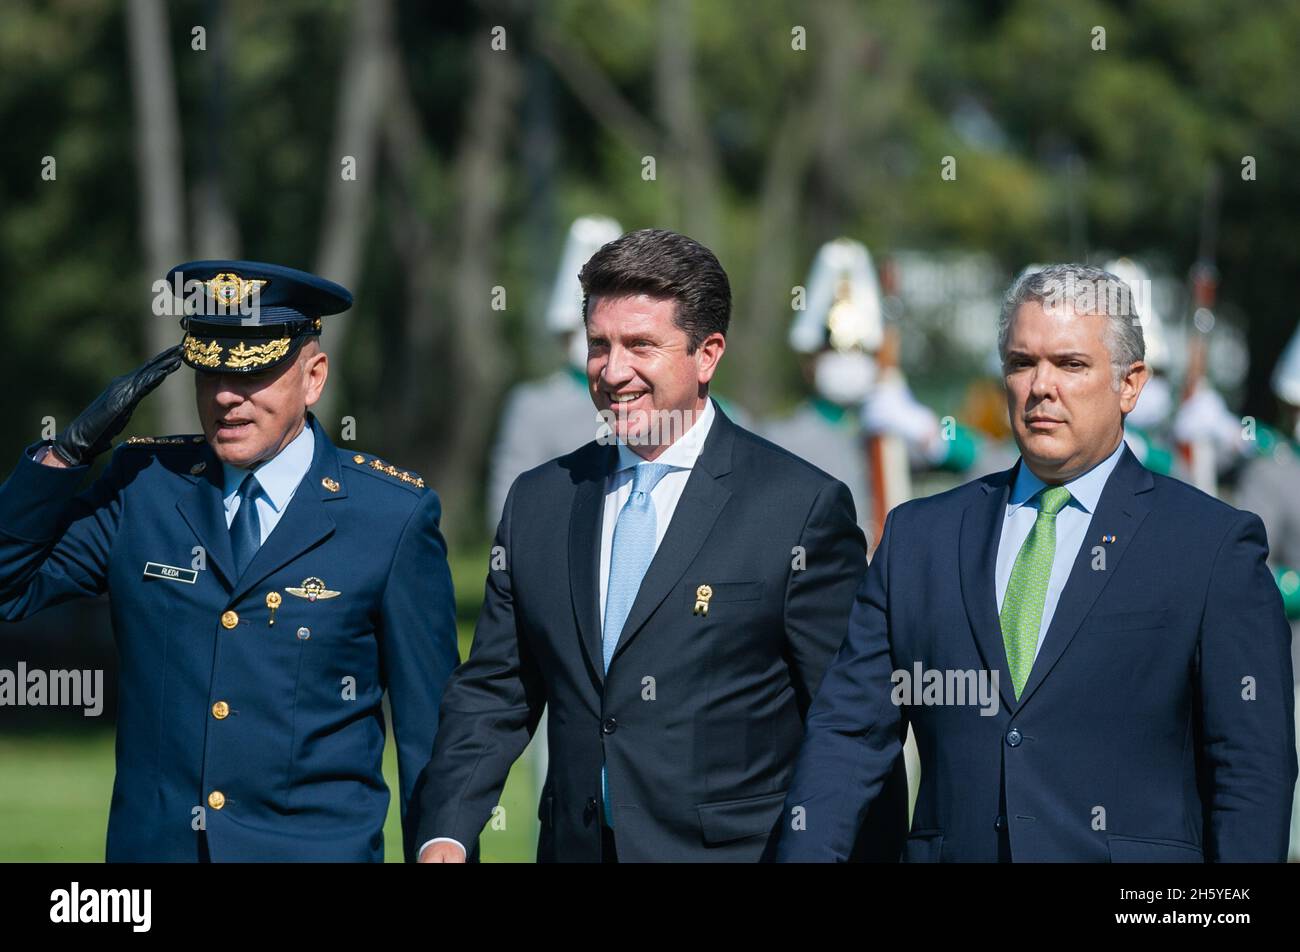 Bogota, Colombia. 11th Nov, 2021. Minister of Defense Diego Molano (Left) and President of Colombia Ivan Duque Marquez (Right) during an event were Colombia's president Ivan Duque Marquez and Colombia's Minister of Defense Diego Molano in conmmemoration of the 130 anniversary of Colombia's National Police and the promotion to officers to more than a 100 police members, in Bogota, Colombia on November 11, 2021. Credit: Long Visual Press/Alamy Live News Stock Photo